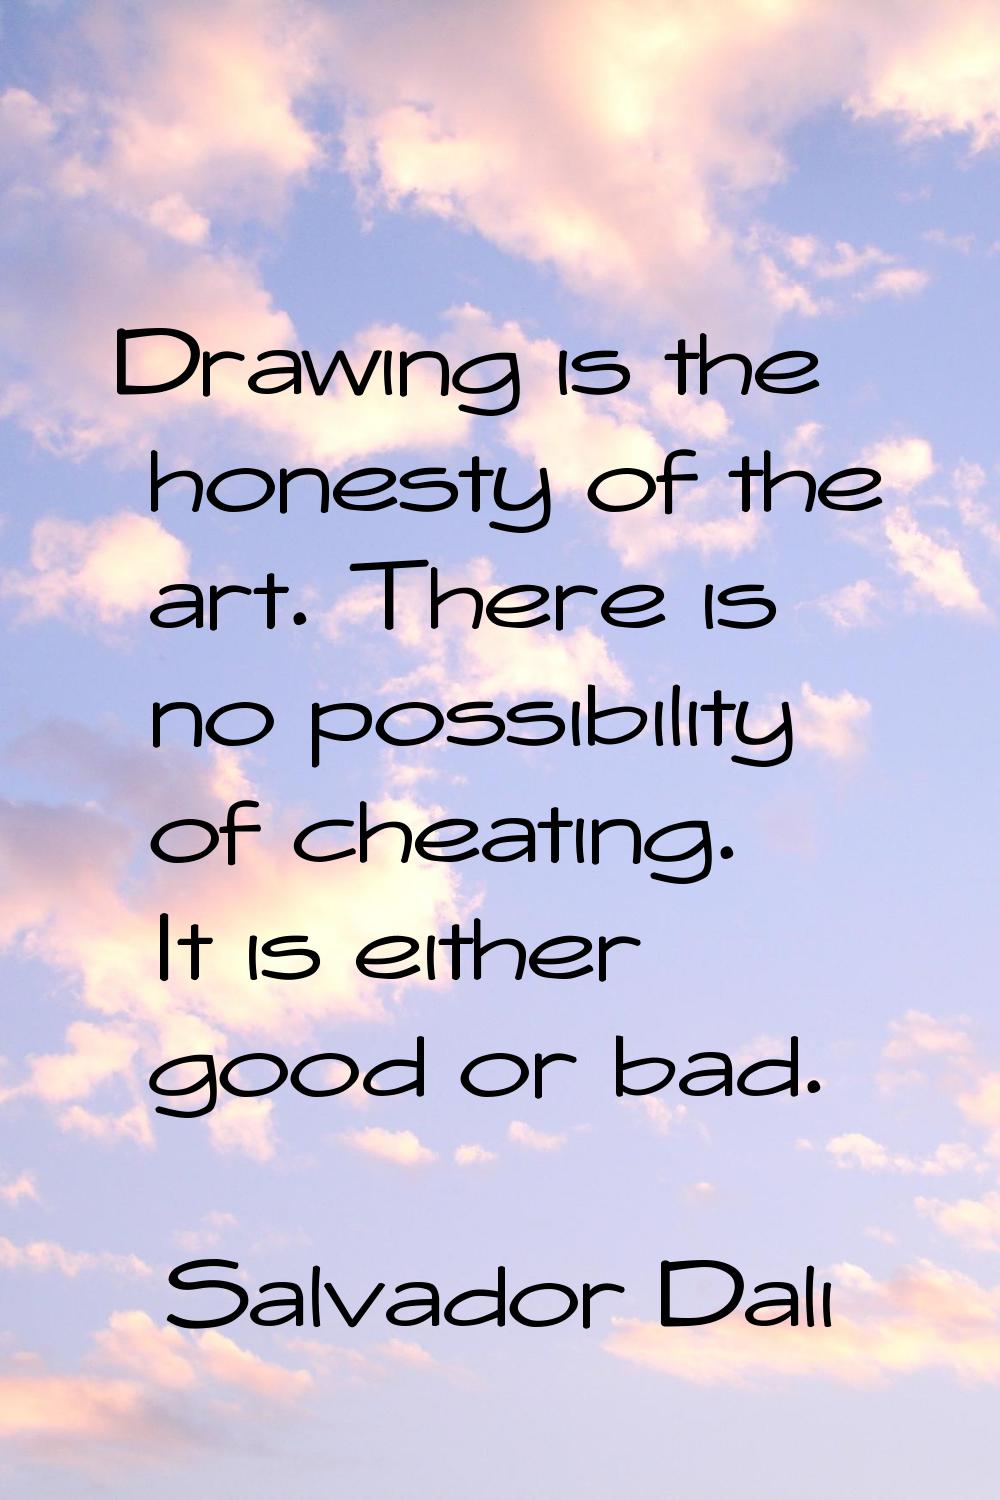 Drawing is the honesty of the art. There is no possibility of cheating. It is either good or bad.